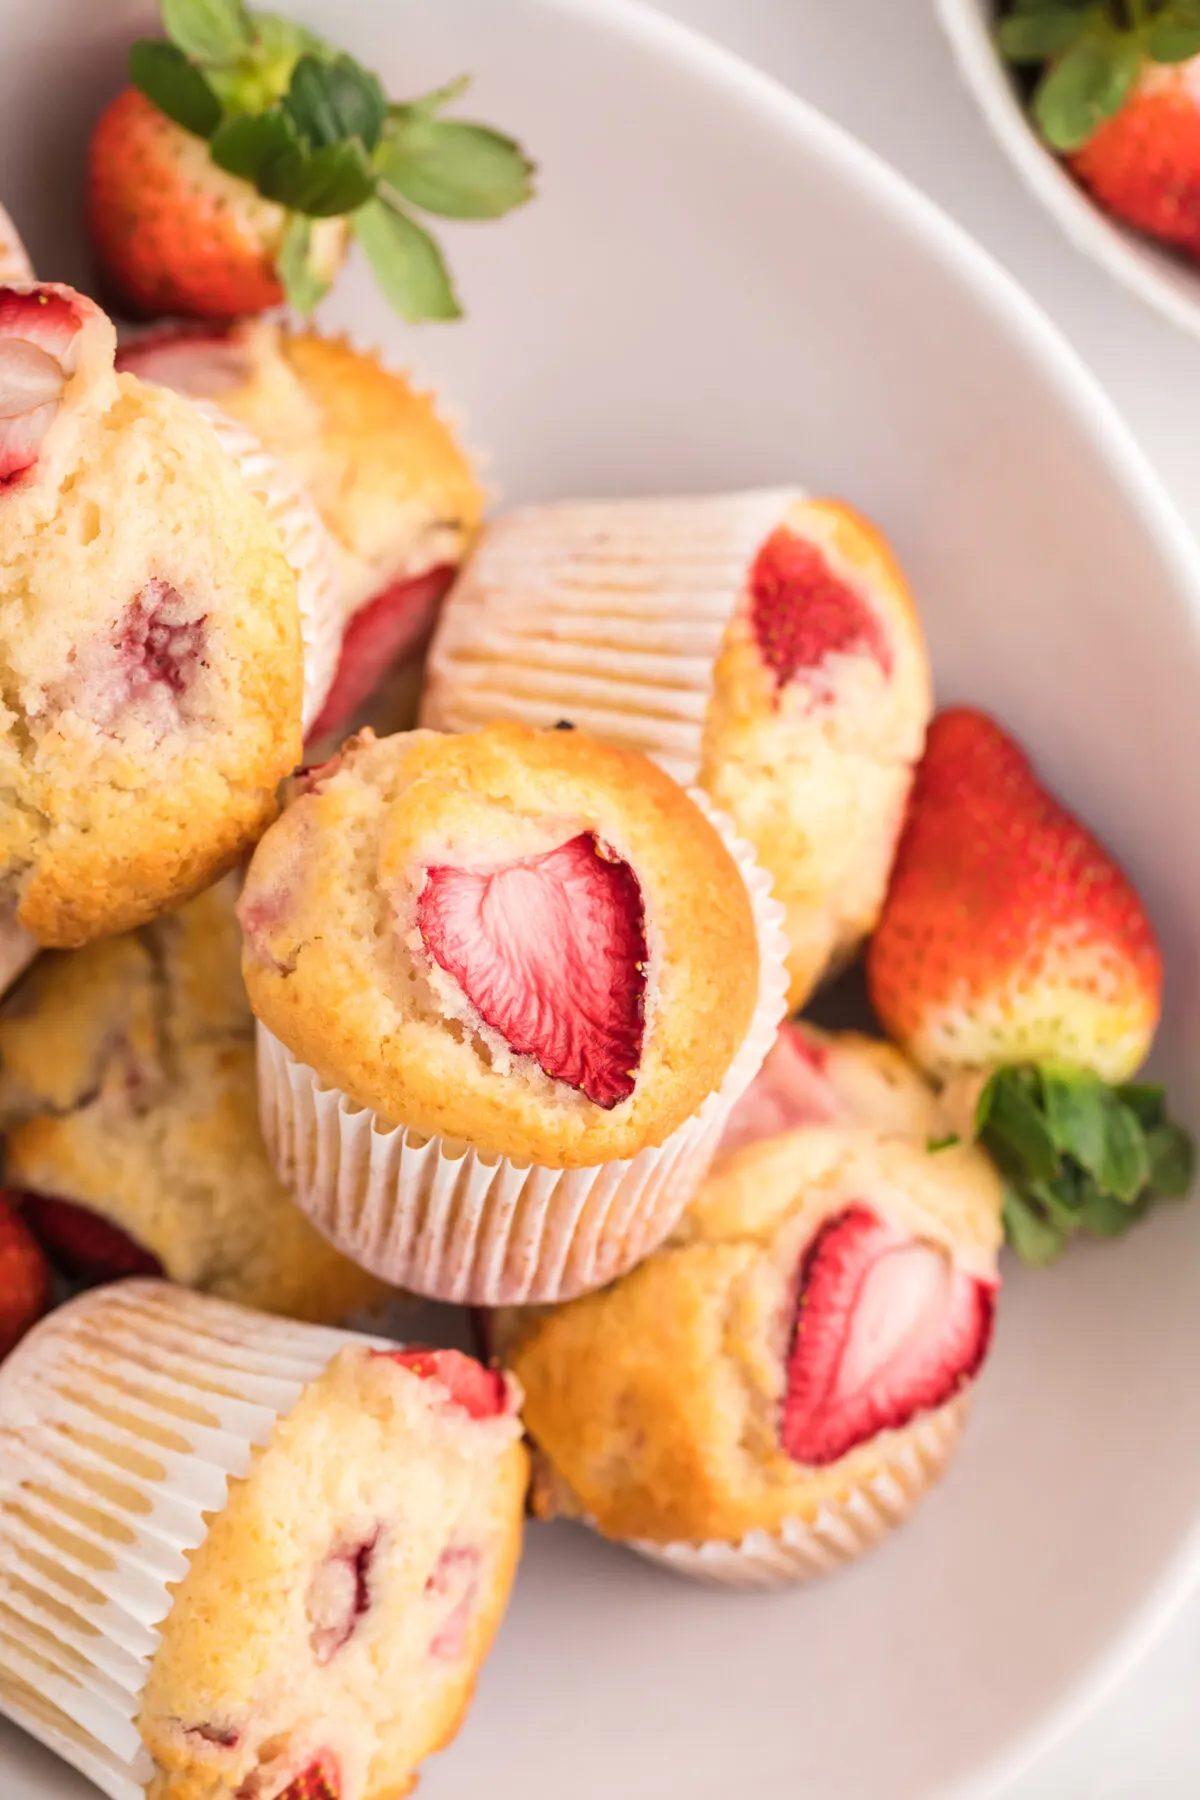 Whip up a batch of moist and fluffy strawberry muffins in no time with this simple recipe! Perfect for breakfast, brunch, or a sweet snack!